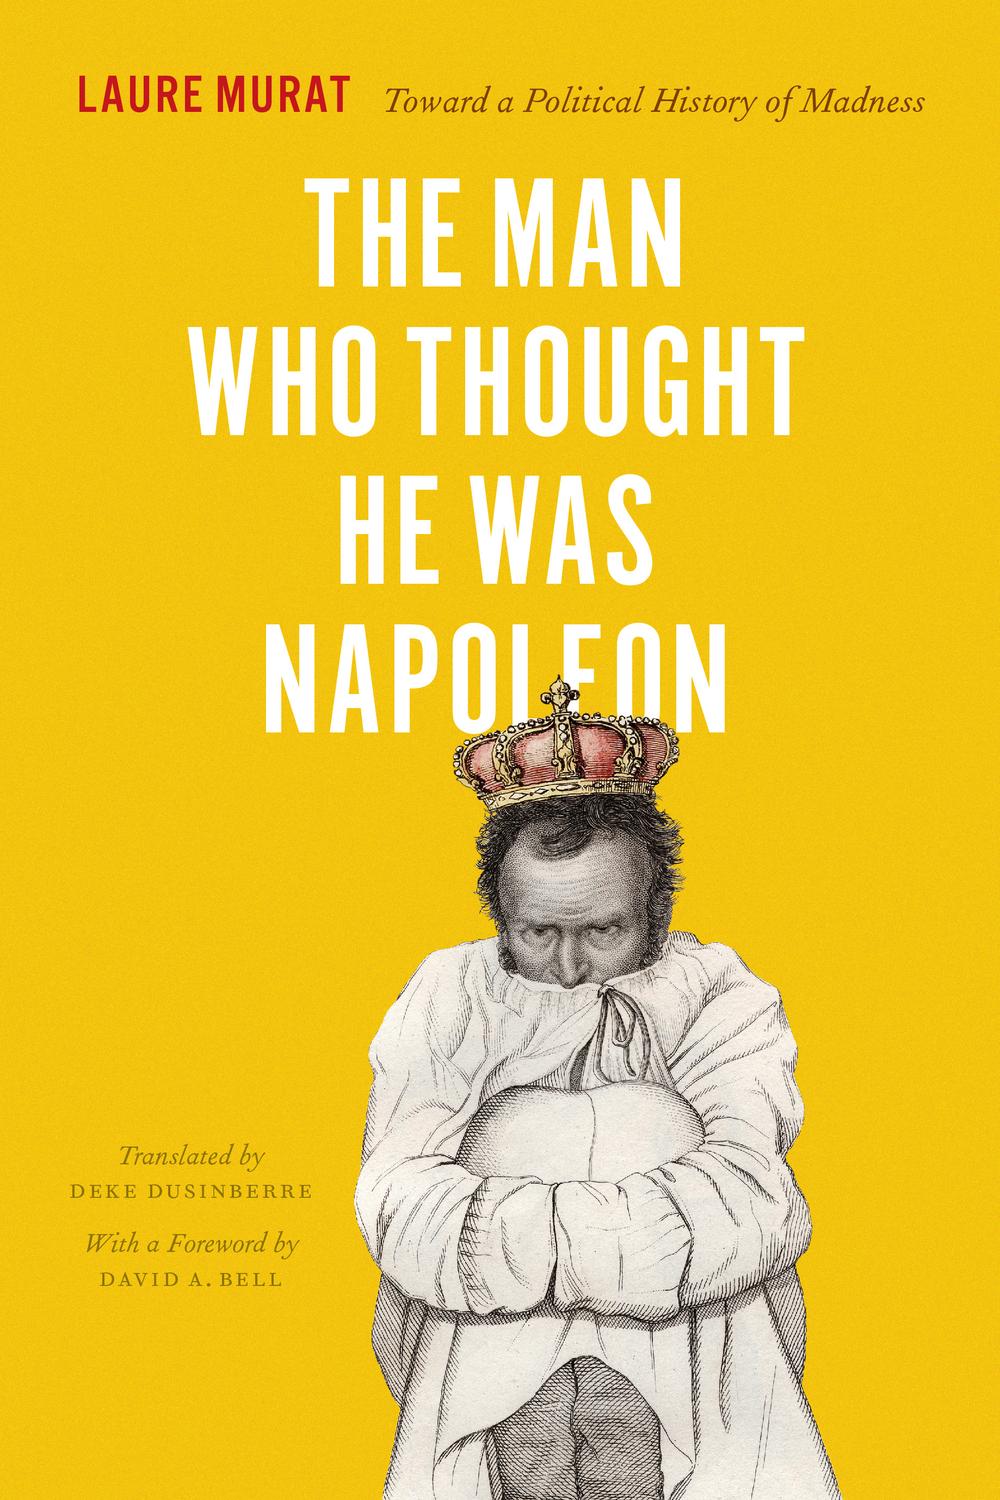 The Man Who Thought He Was Napoleon - Laure Murat, Deke Dusinberre